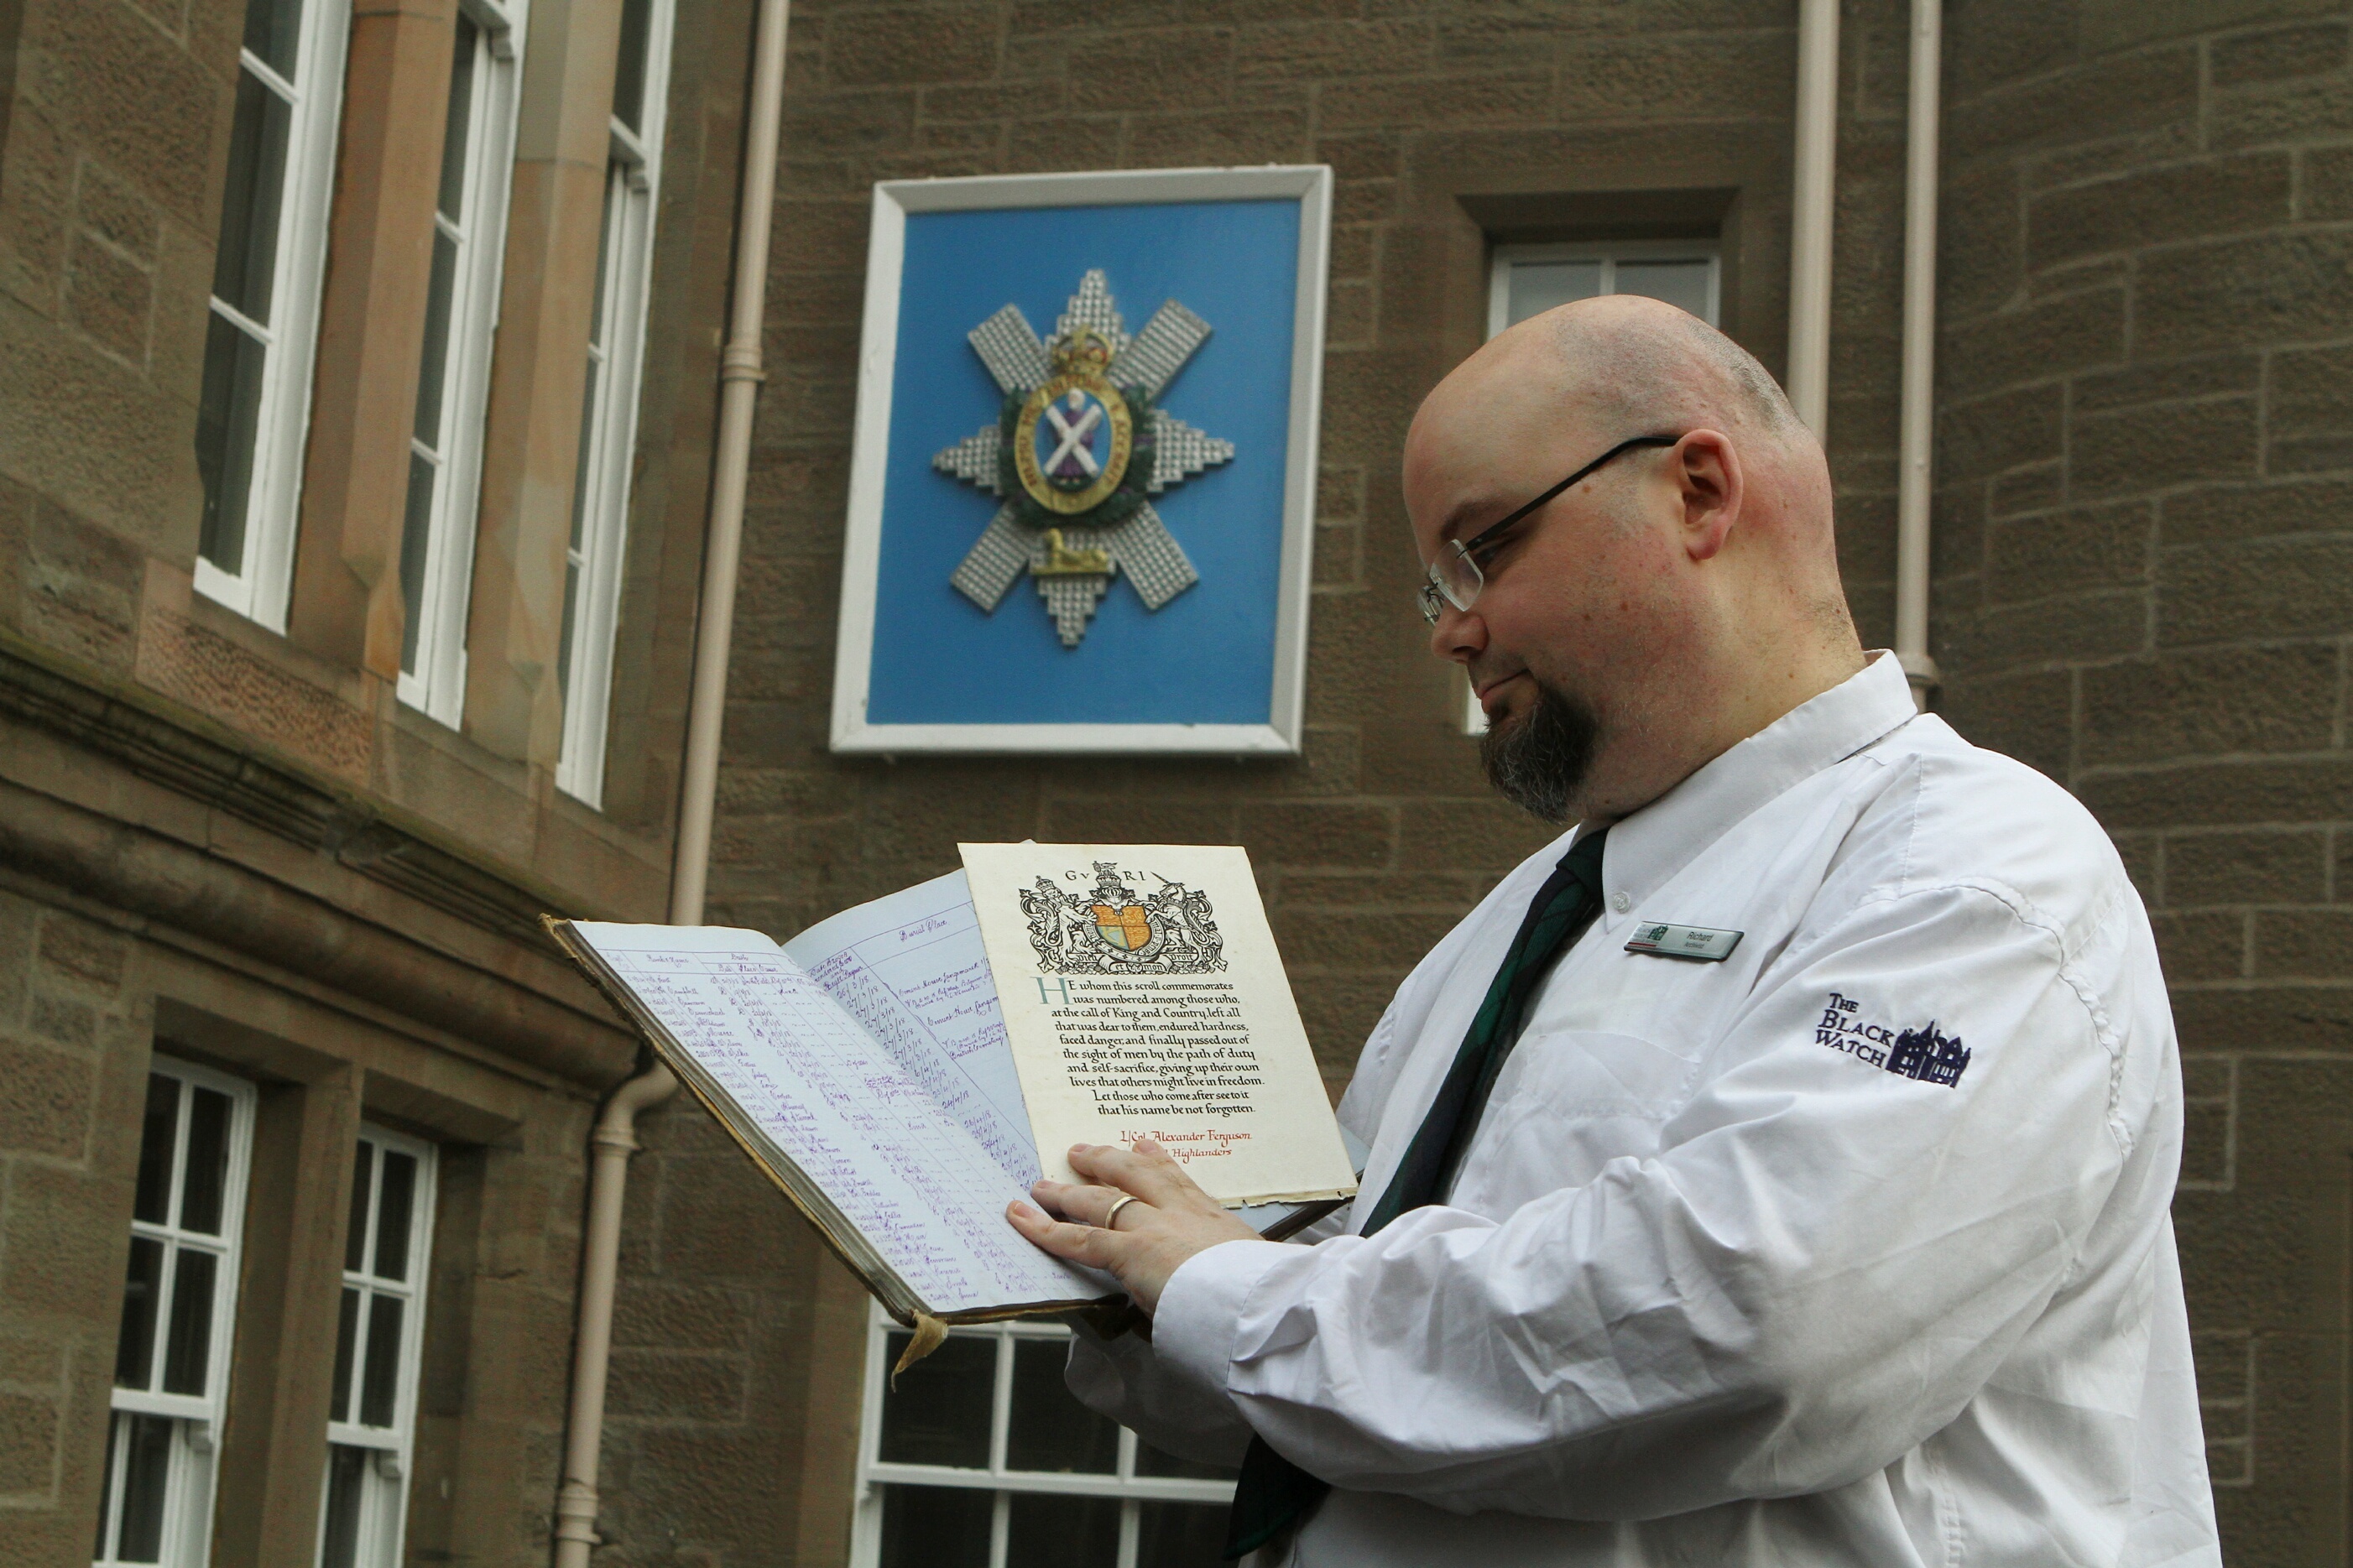 Richard McKenzie, Archivist at the Black Watch Museum, holding  the Burial Book of the 1st Battalion Black Watch and the Scroll Of Honour from L.Cpl. Alexander Ferguson of the Royal Highlanders.